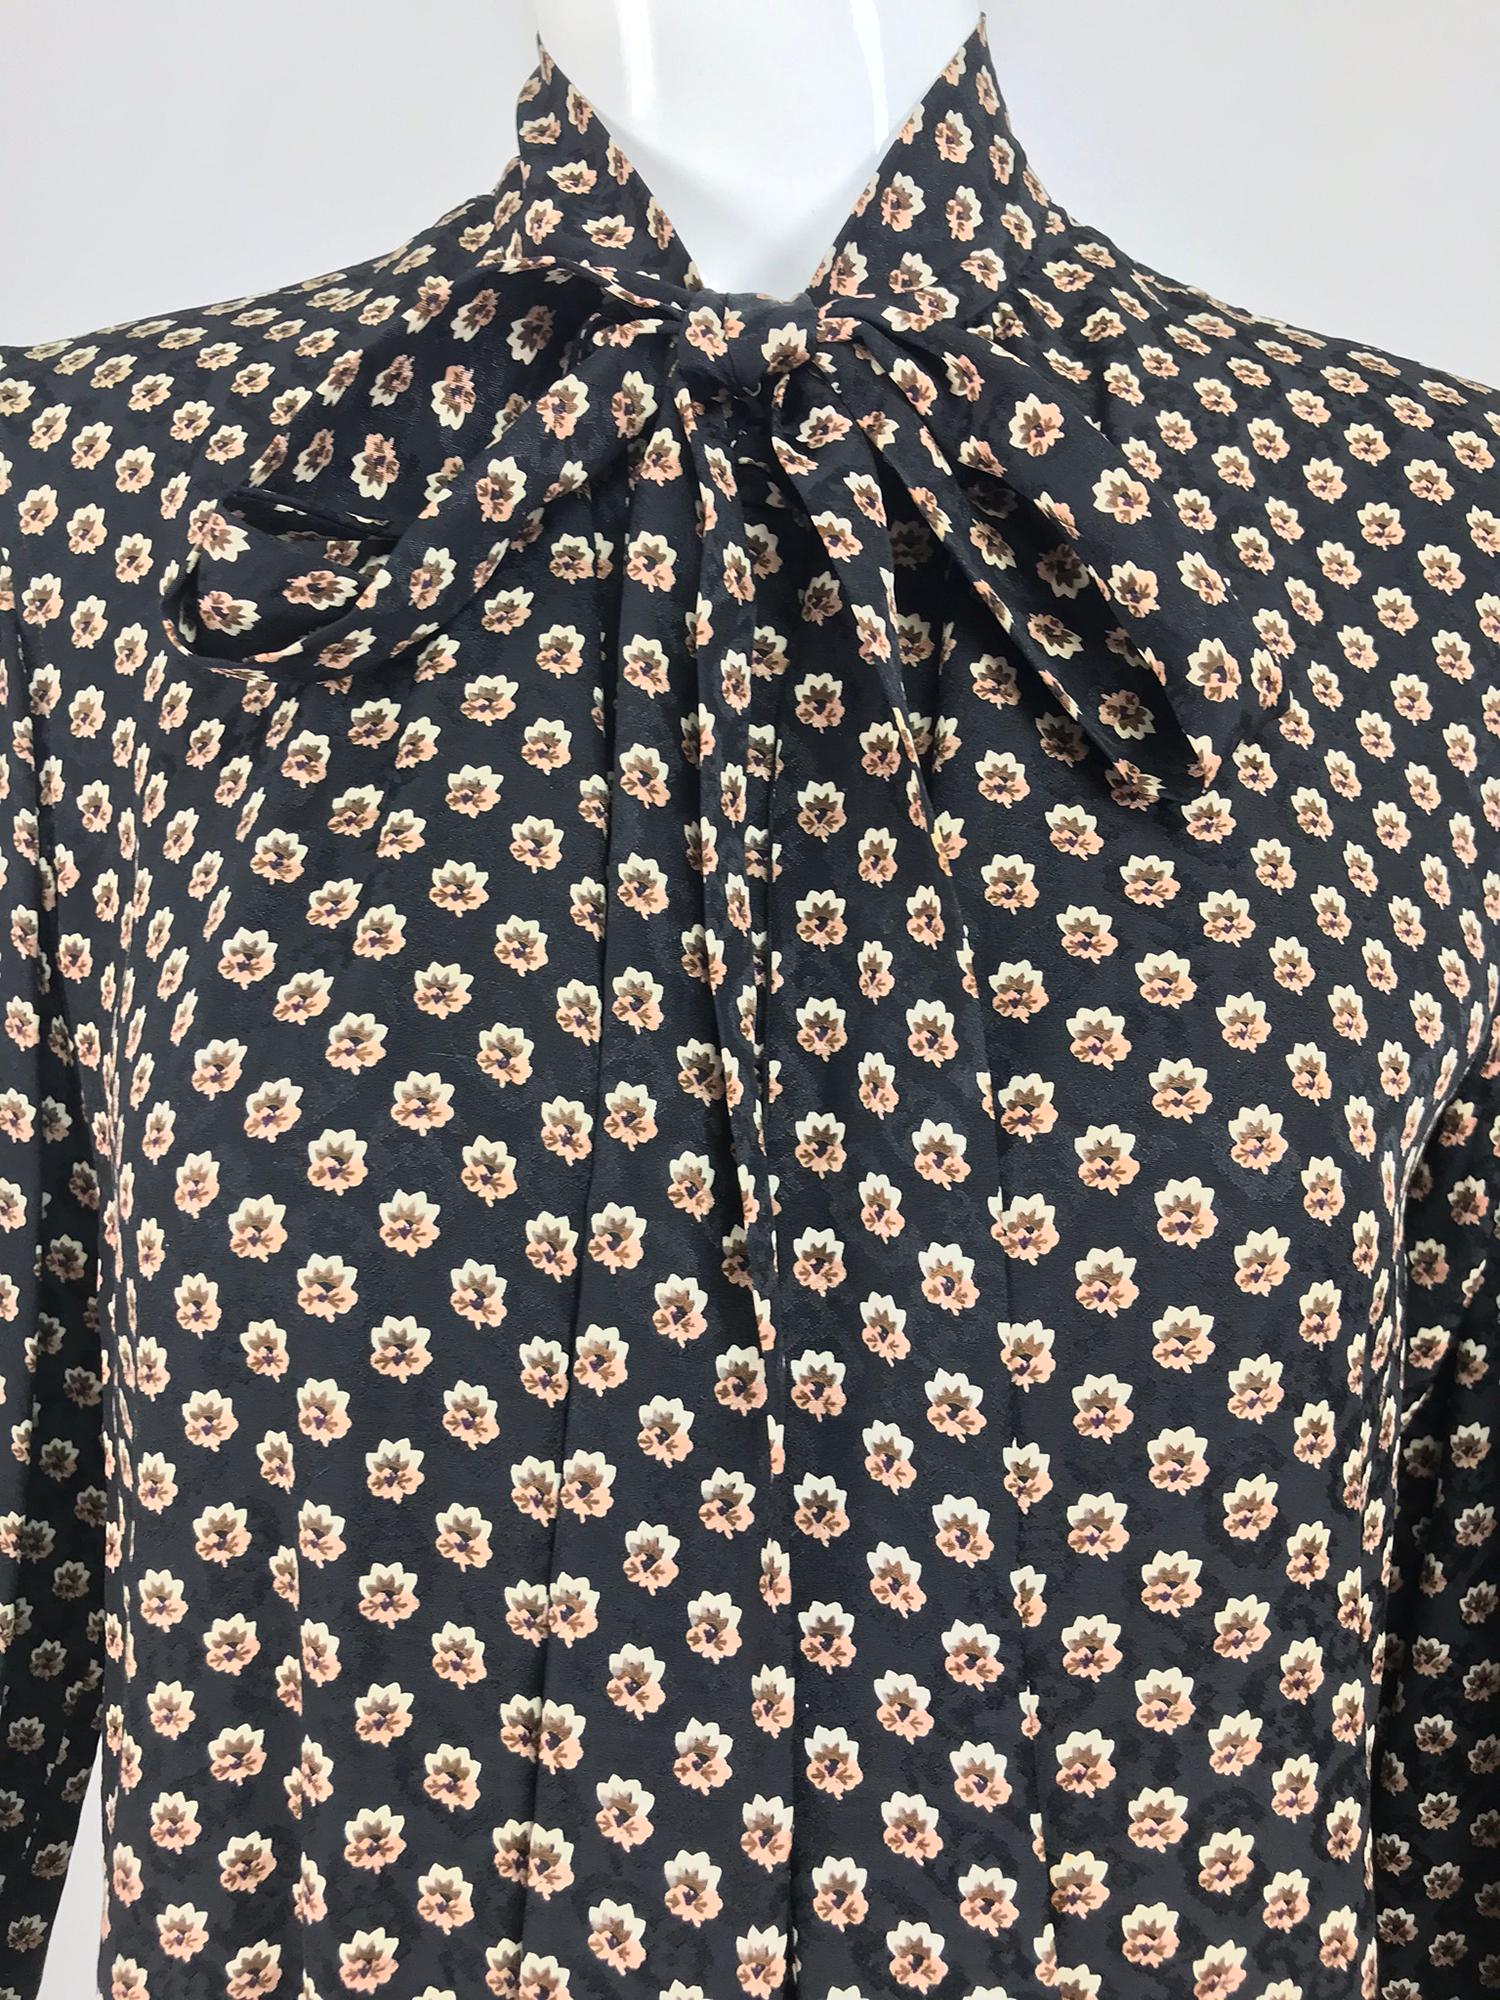 Yves Saint Laurent Provincial Print Silk Bow Neck Blouse from the 1970s.  Yves Saint Laurent designed the best blouses, always simple in design and elegant when worn, they never go out of style. From the 1970s this Provincial print blouse has a